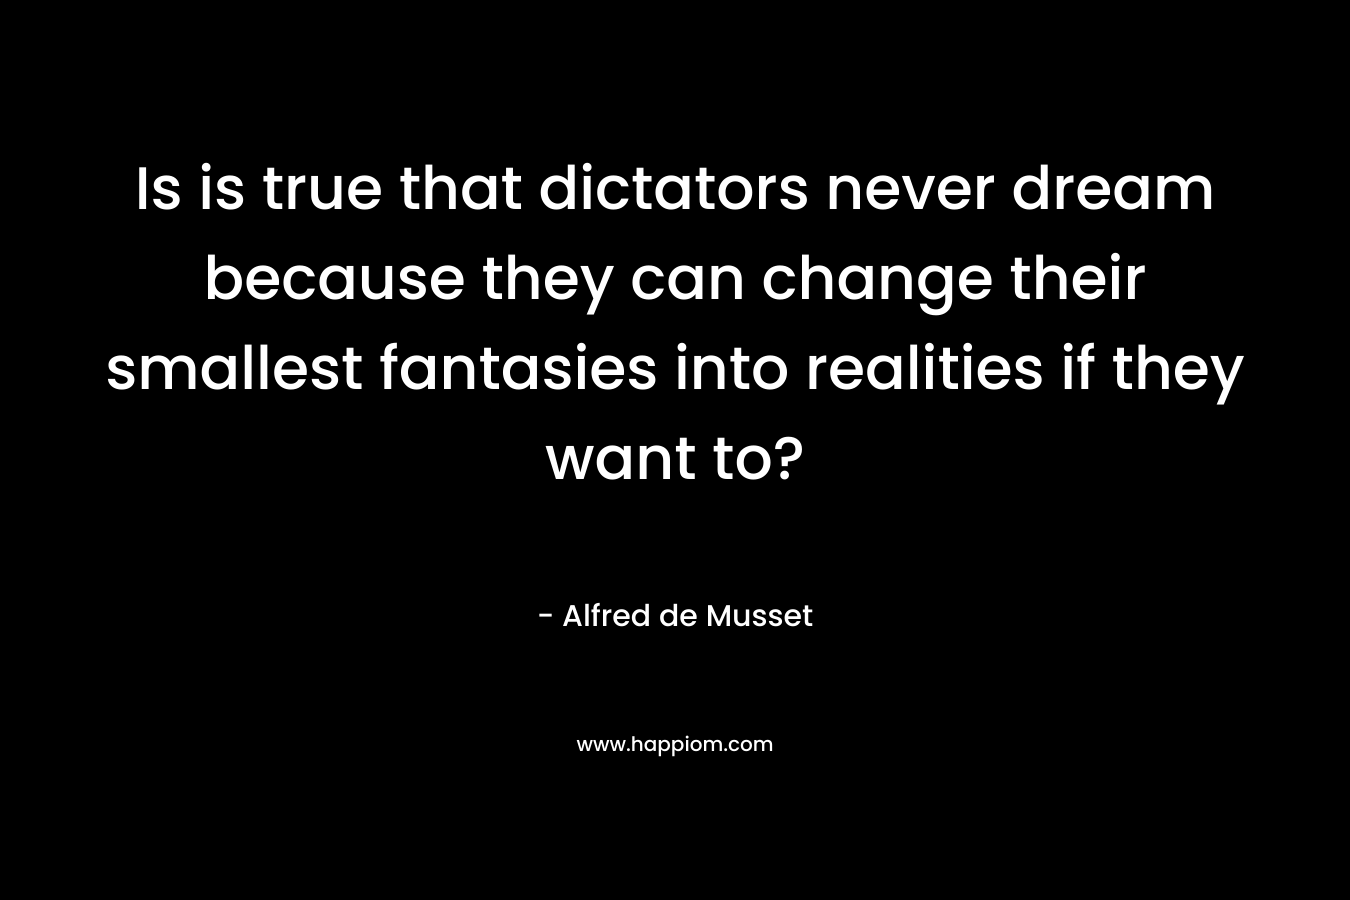 Is is true that dictators never dream because they can change their smallest fantasies into realities if they want to?